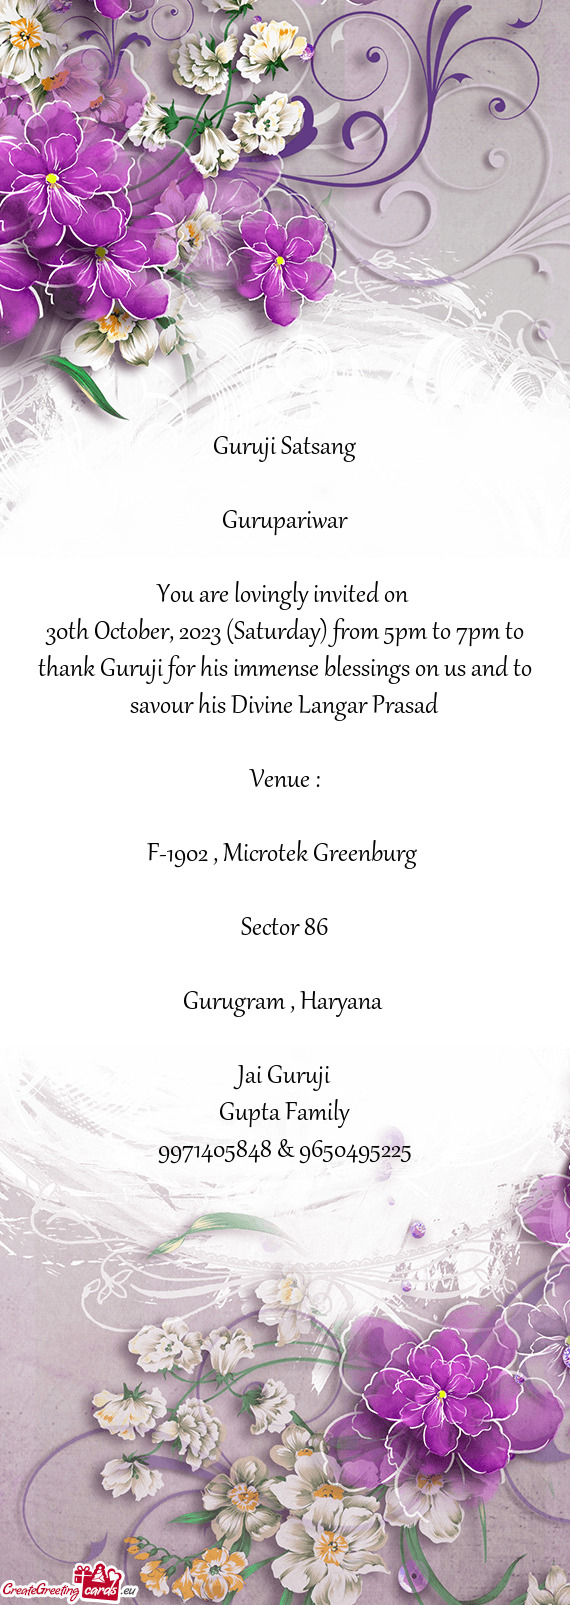 30th October, 2023 (Saturday) from 5pm to 7pm to thank Guruji for his immense blessings on us and to